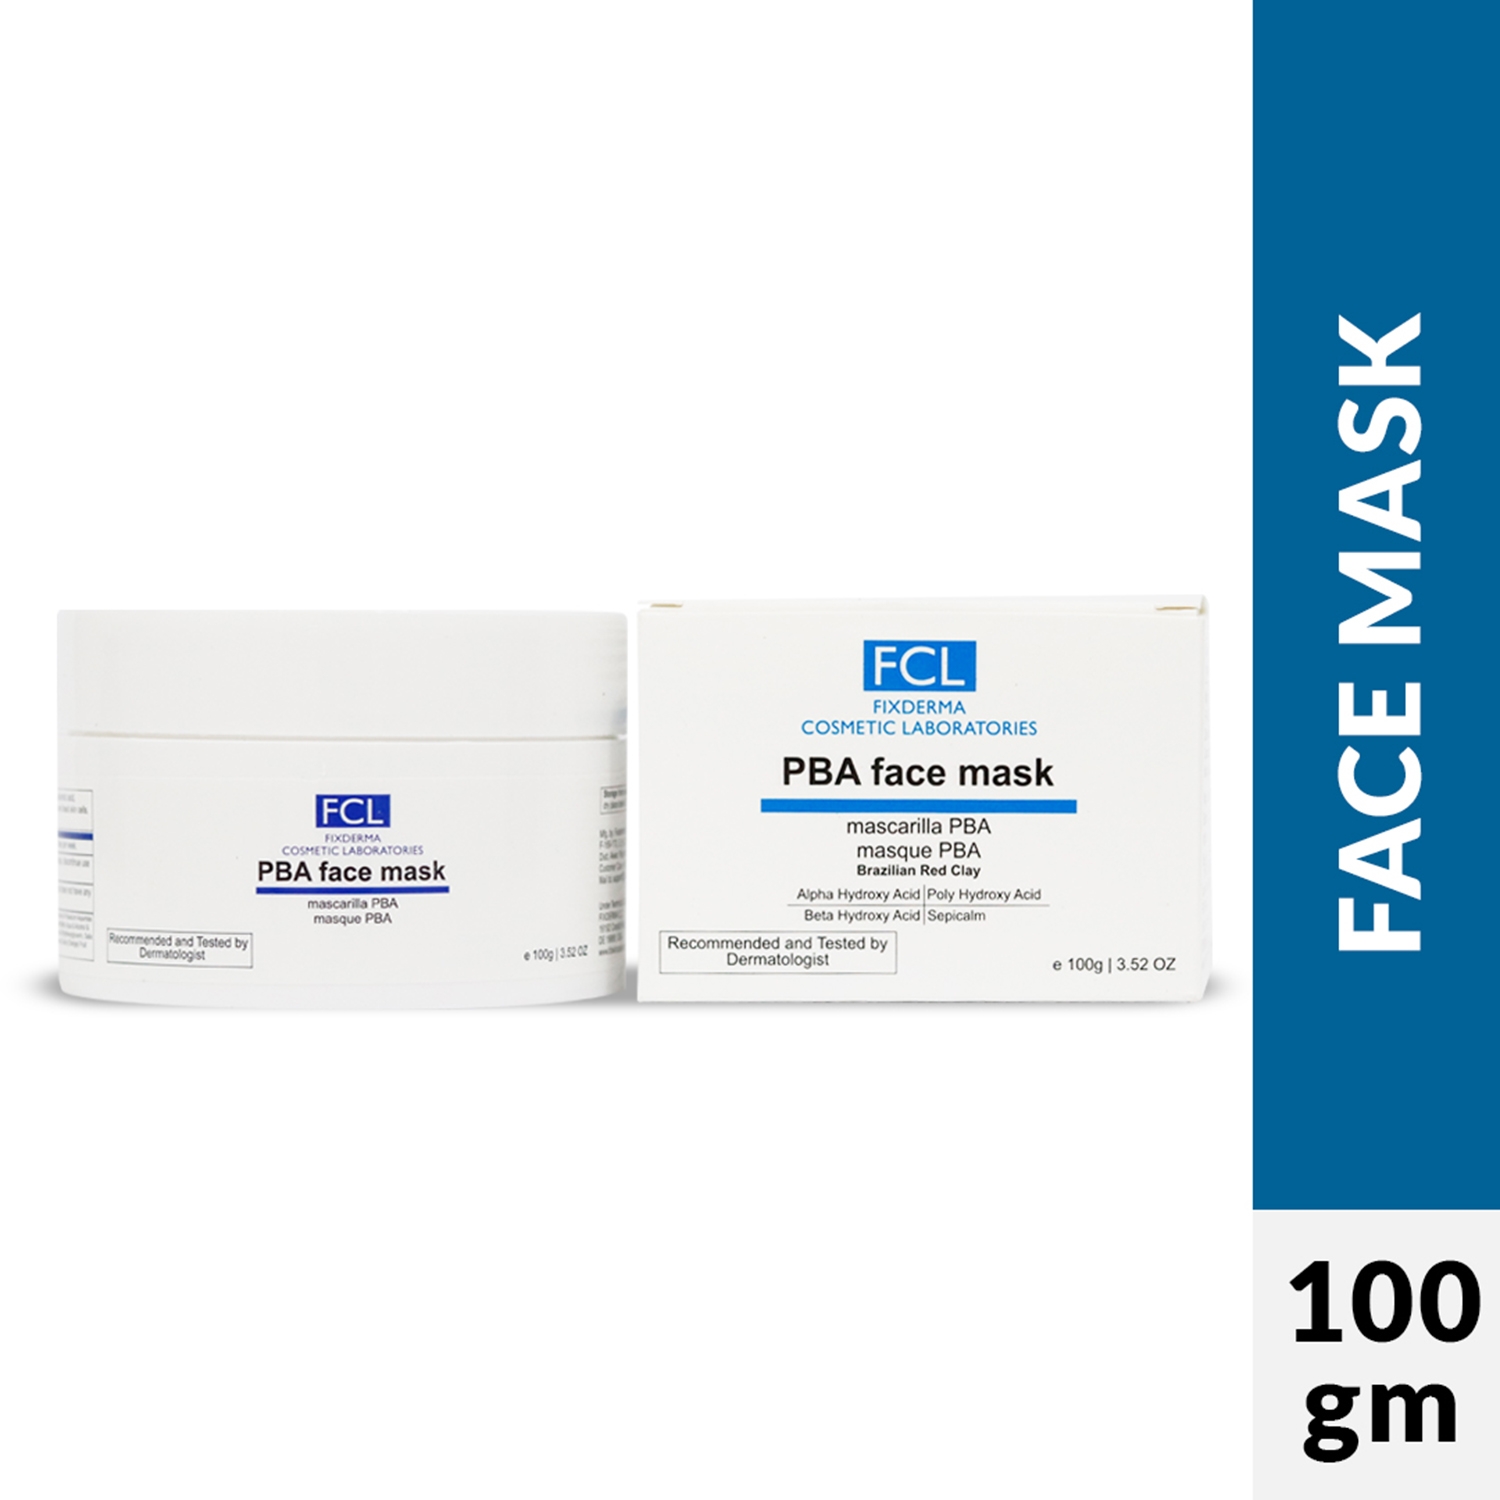 FCL | FCL Fixderma Cosmetic Laboratories Pba Face Mask (100g)